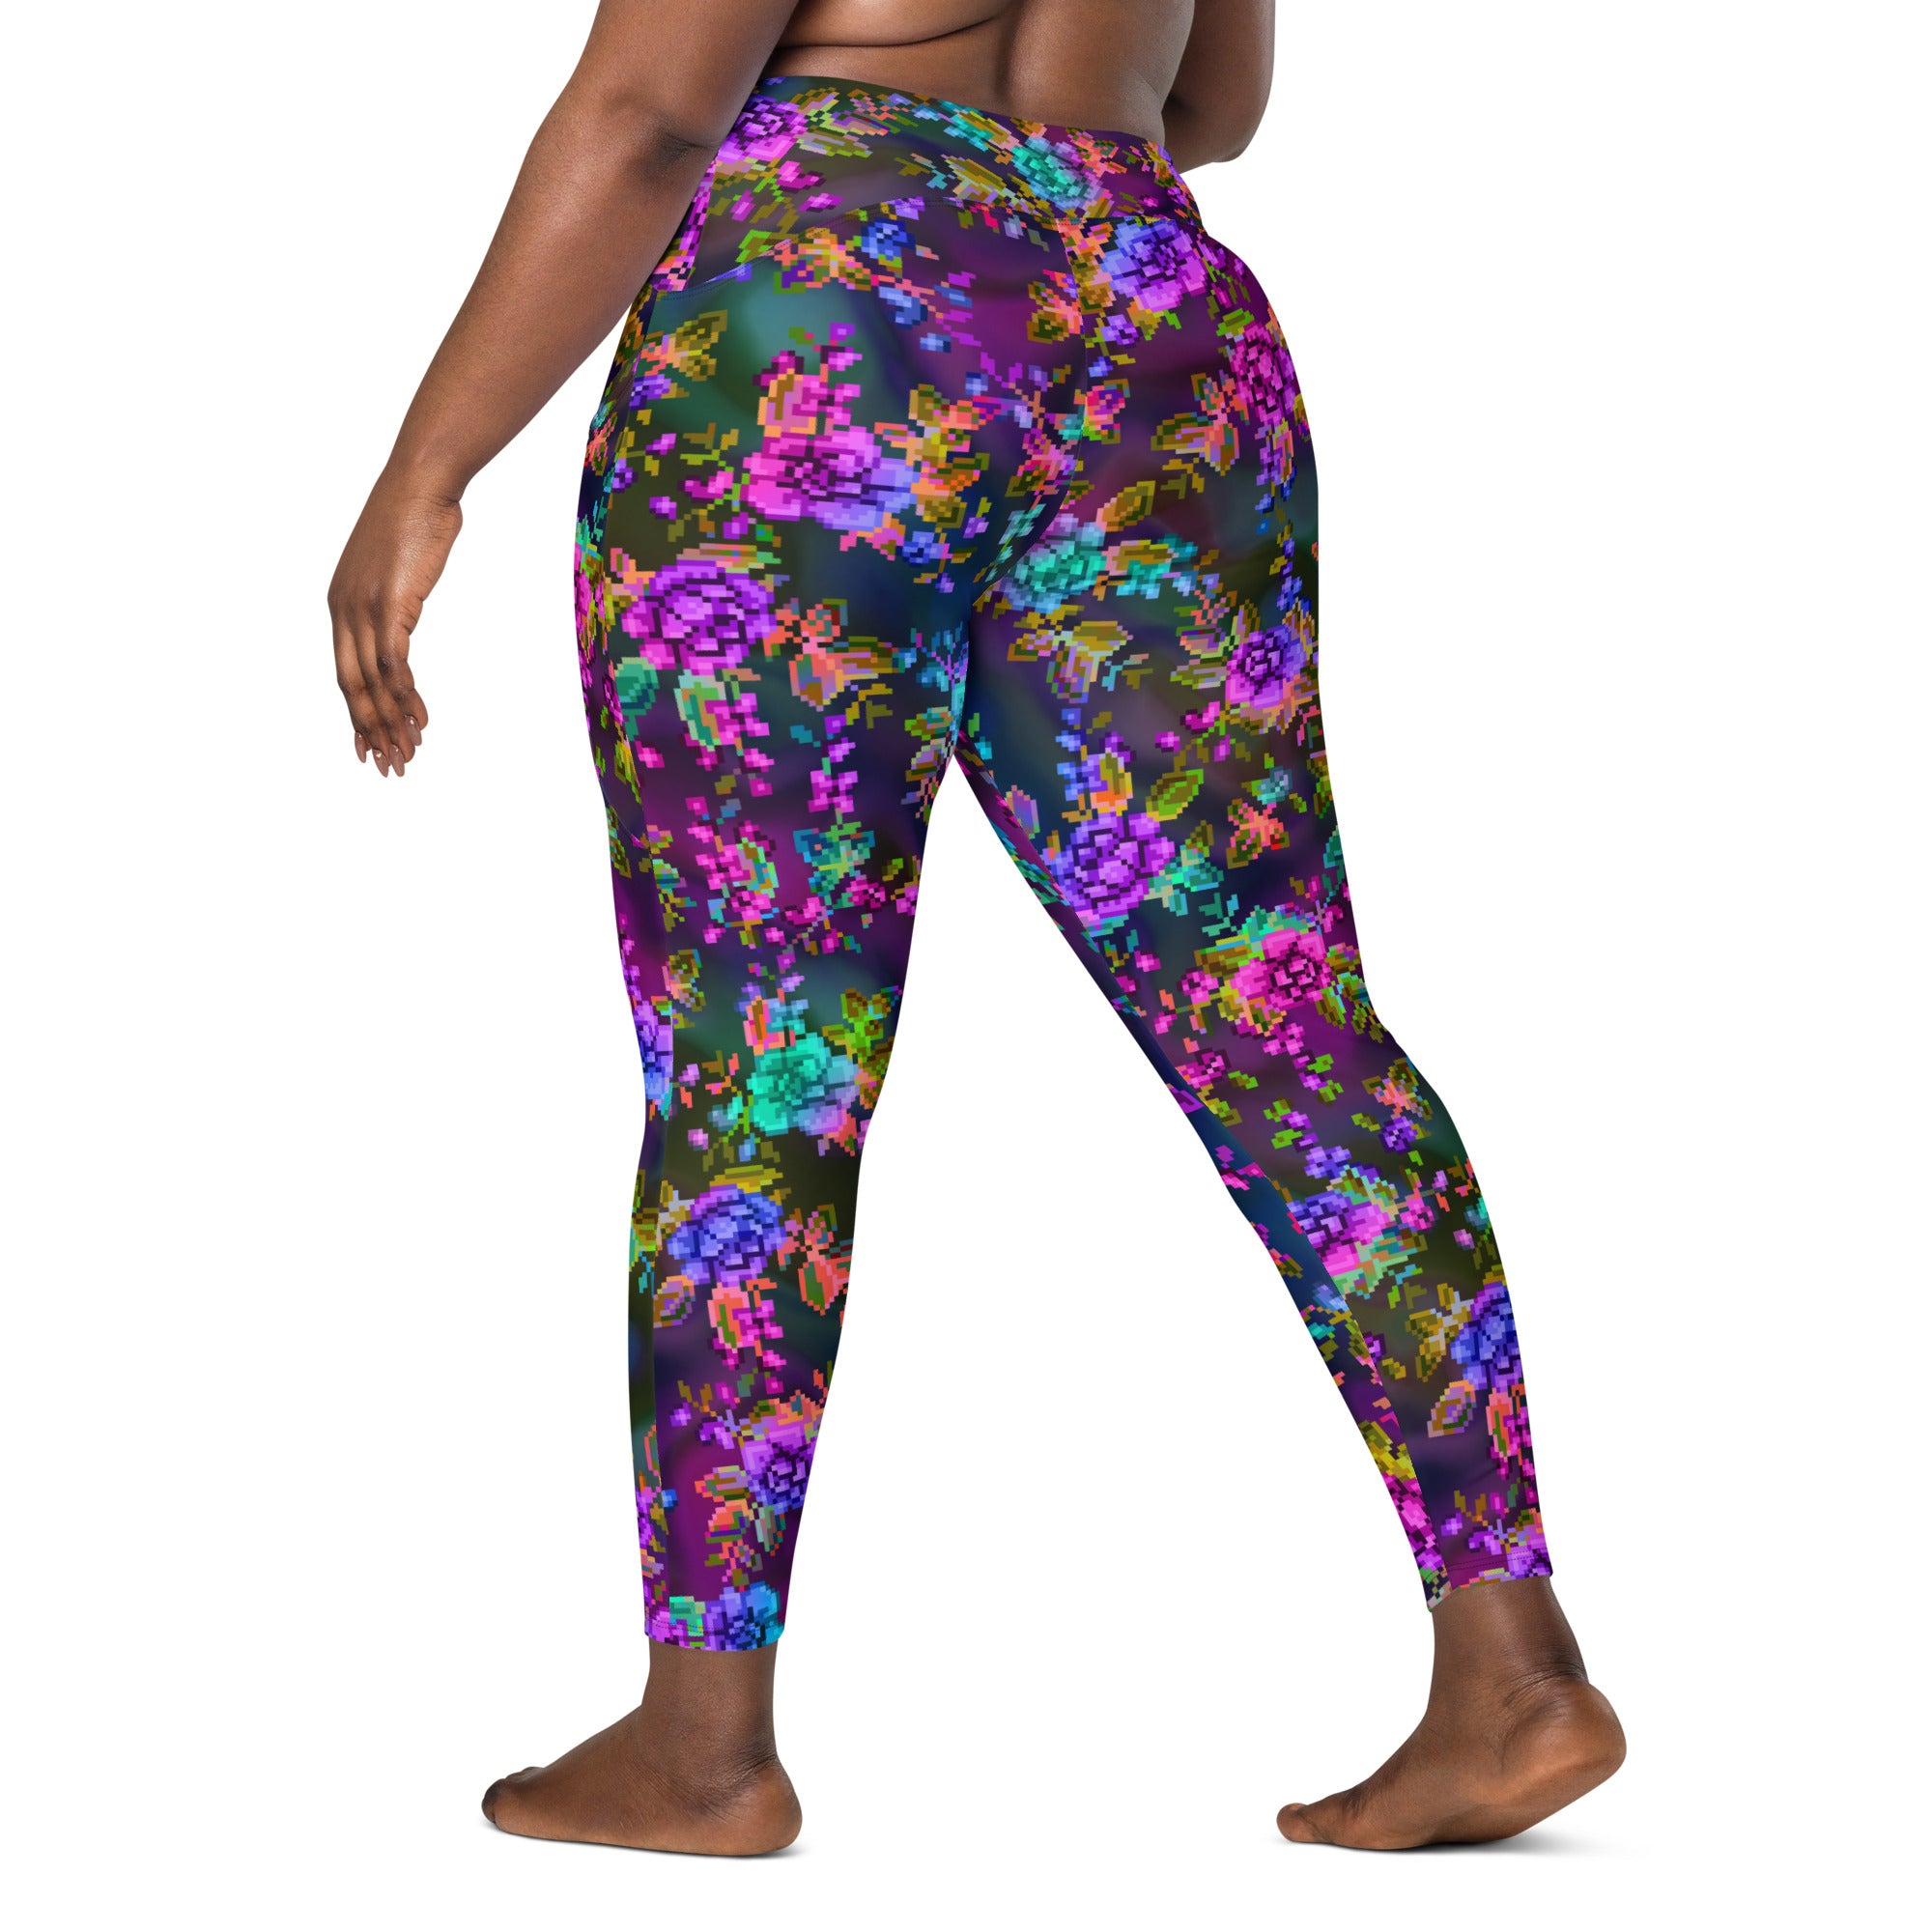 "Pixel Floral (Synthwave)" leggings with pockets